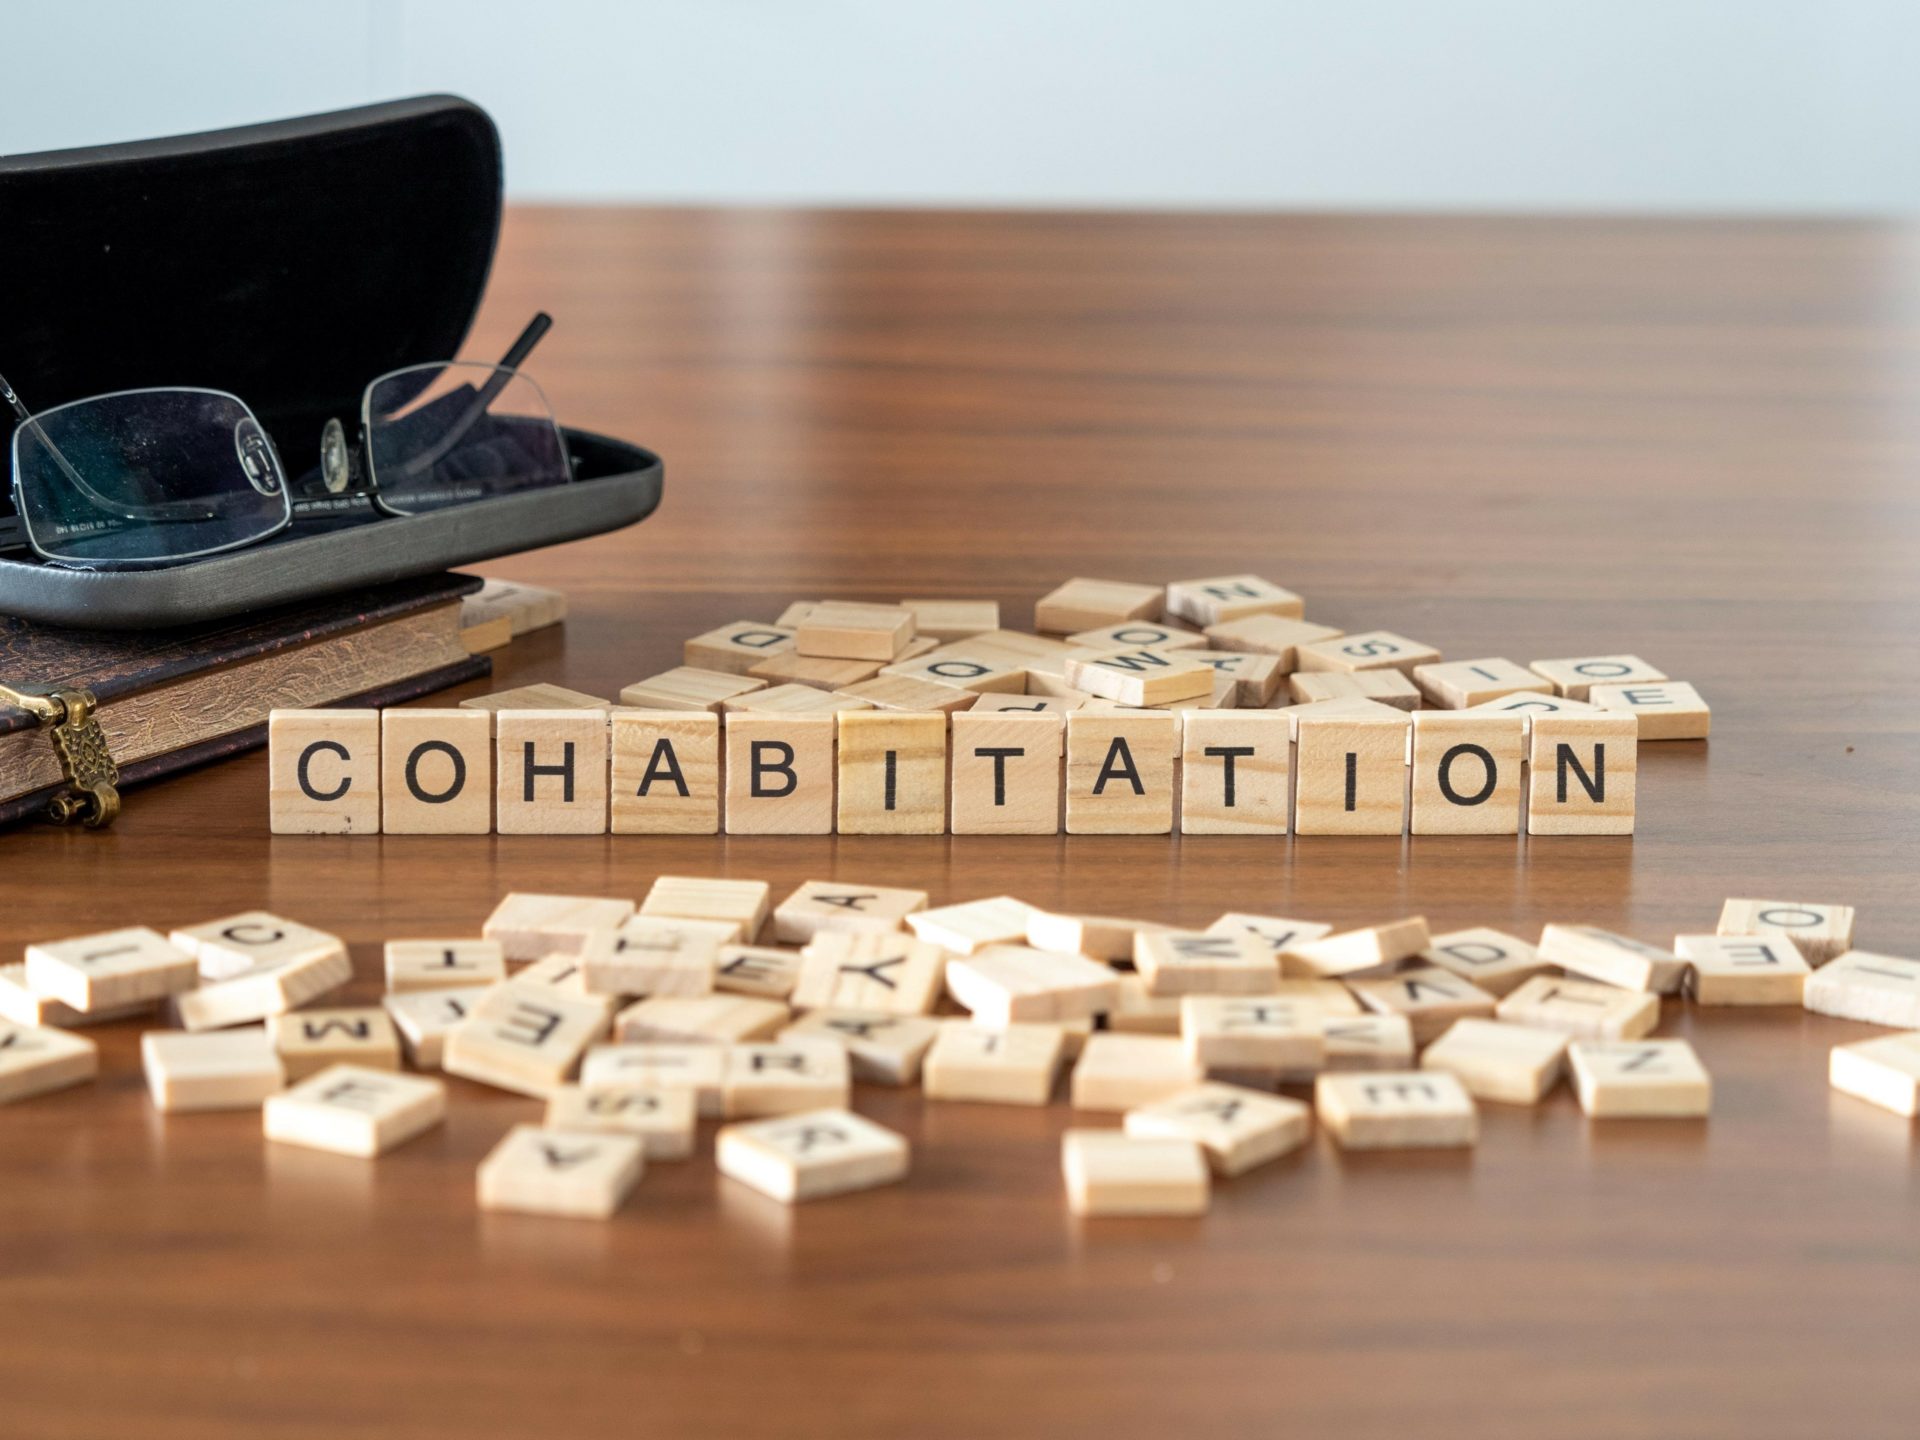 cohabitation with word puzzles